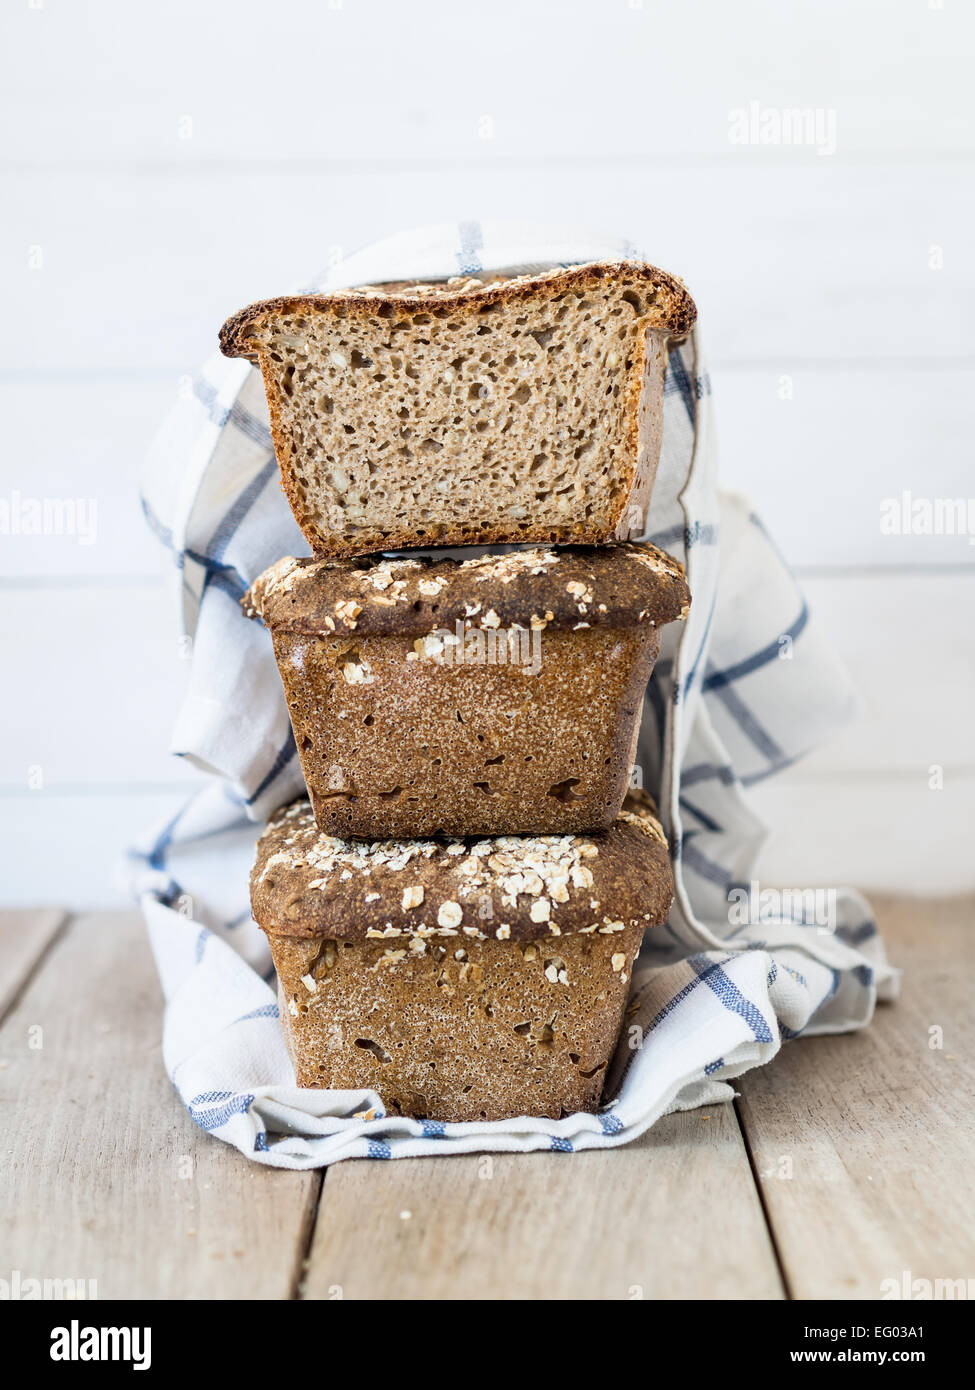 Vertical photo of a pile of three homemade whole grain mixed rye-wheat sourdough breads with seeds on a clear wooden background. Stock Photo